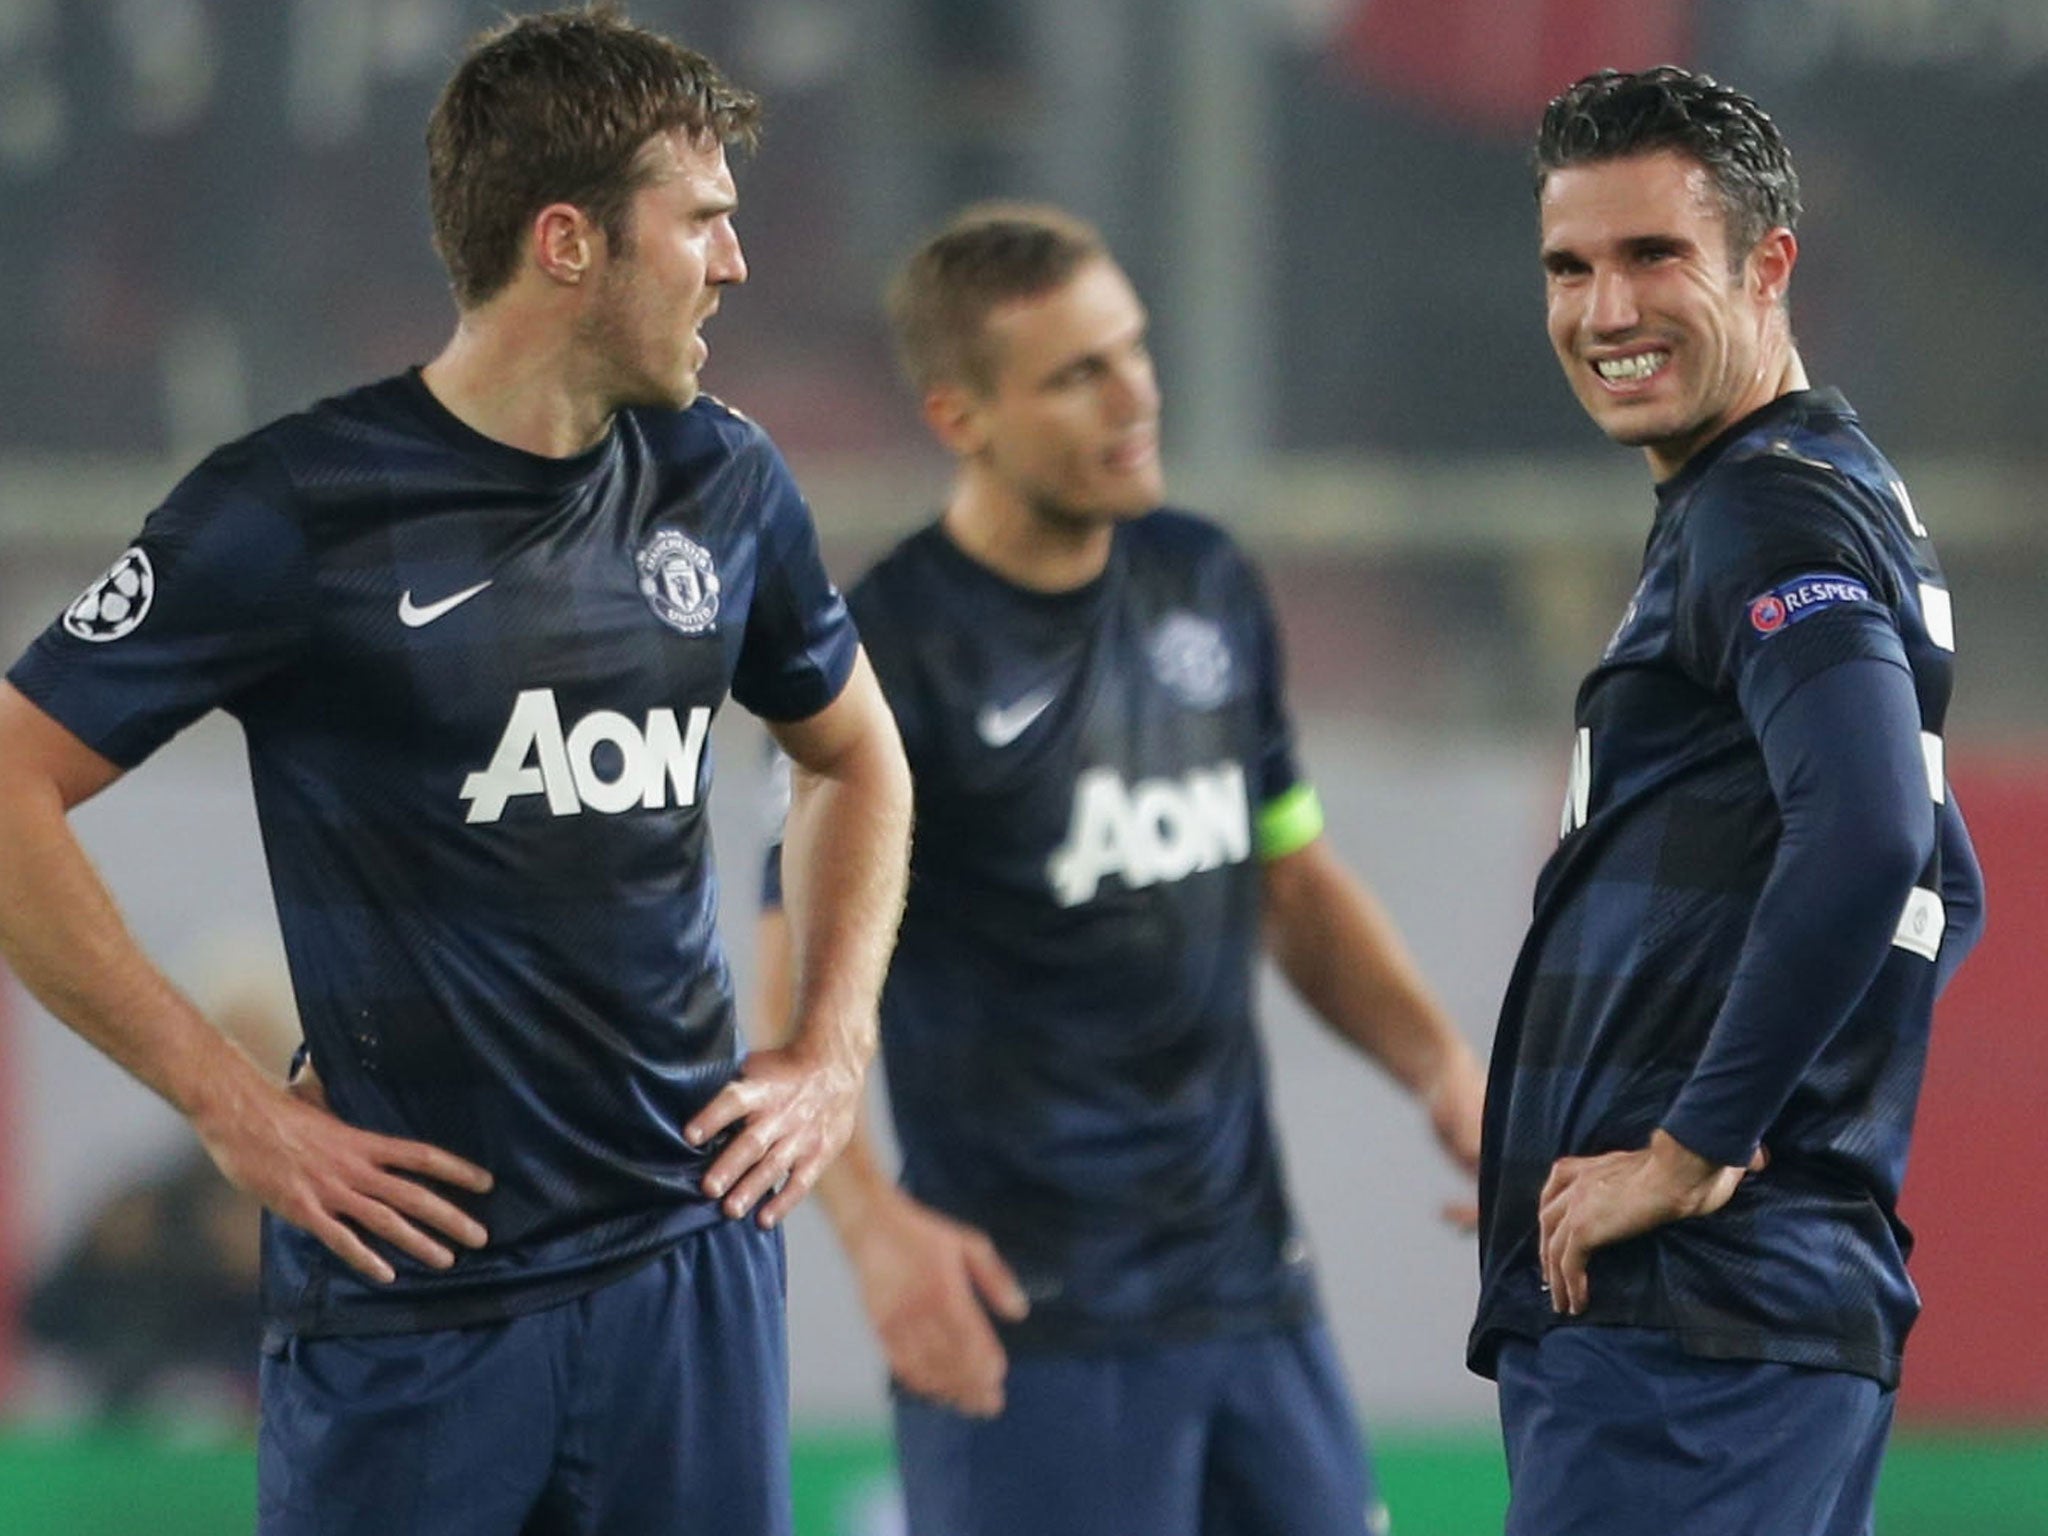 Michael Carrick (left), Nemanja Vidic (centre), and Robin van Persie (right) look on in despair during Manchester United's 2-0 defeat at Olympiakos